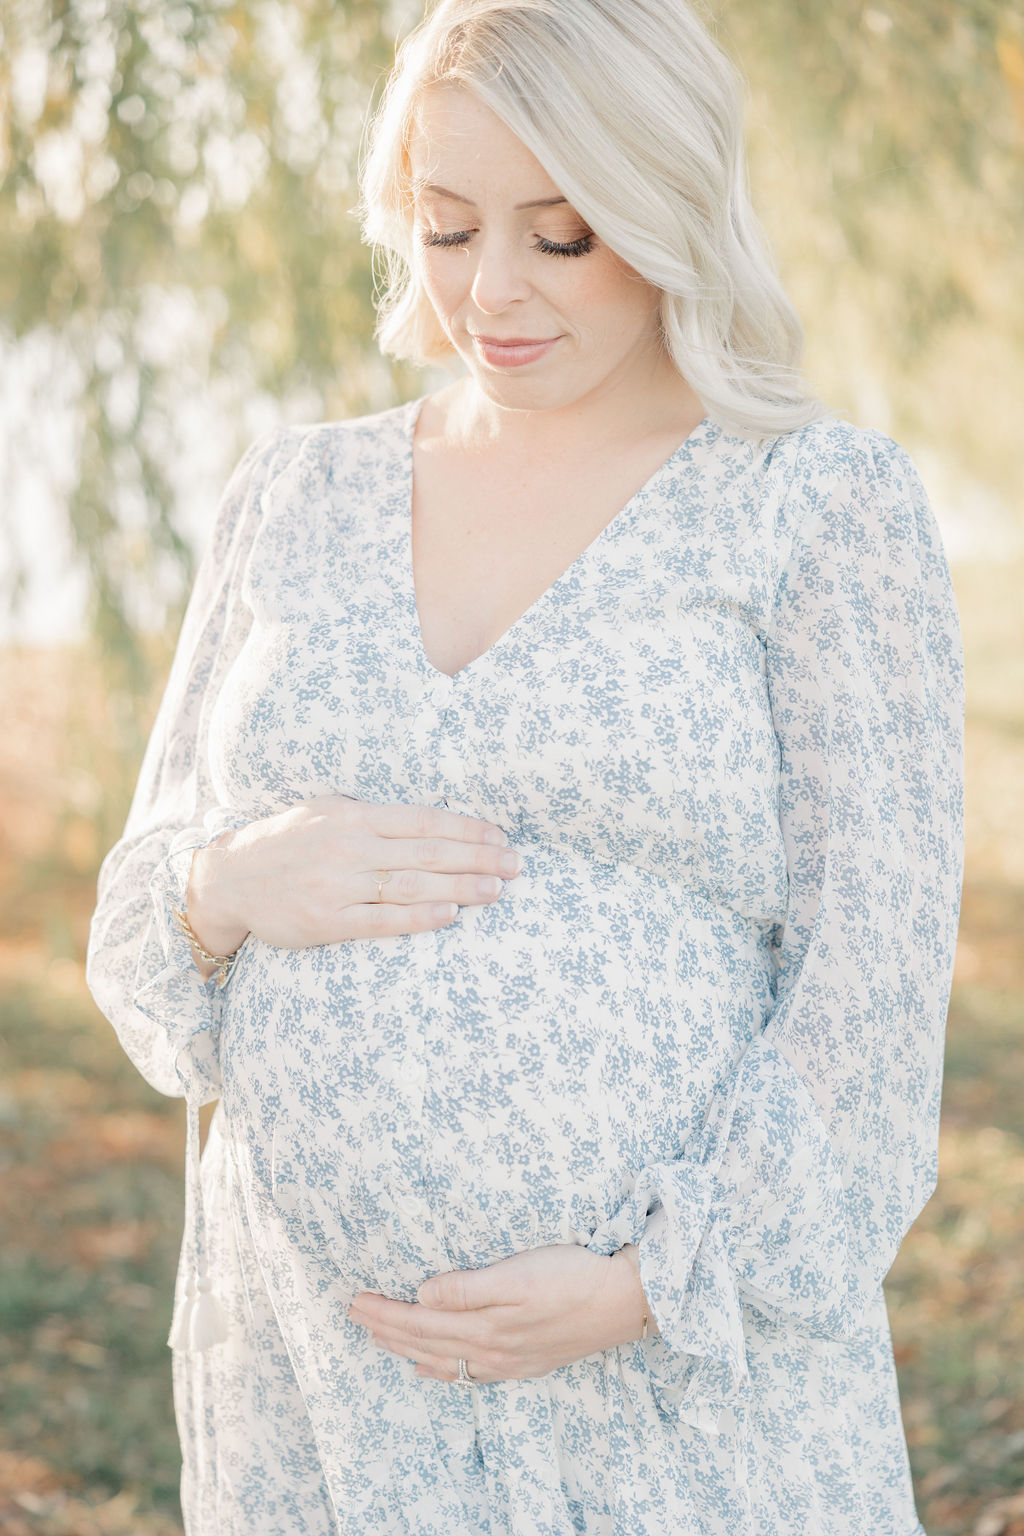 A pregnant woman in a white and blue maternity dress stands under a willow tree gazing down at her bump indianapolis prenatal yoga